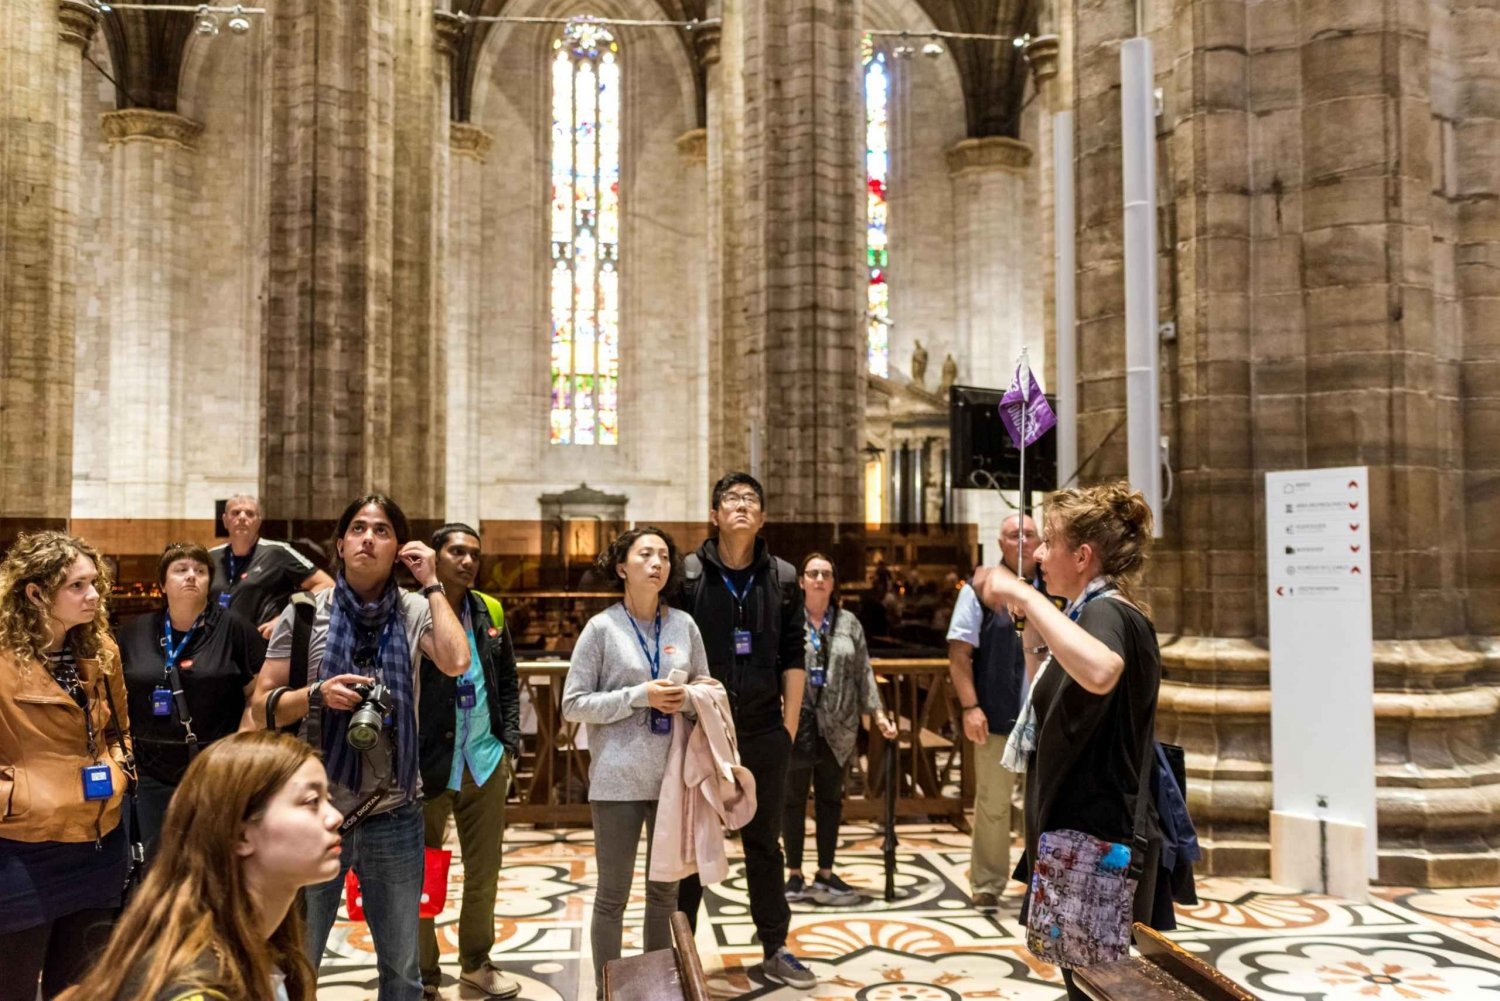 Milan: Duomo and The Last Supper Skip-the-Line Guided Tour